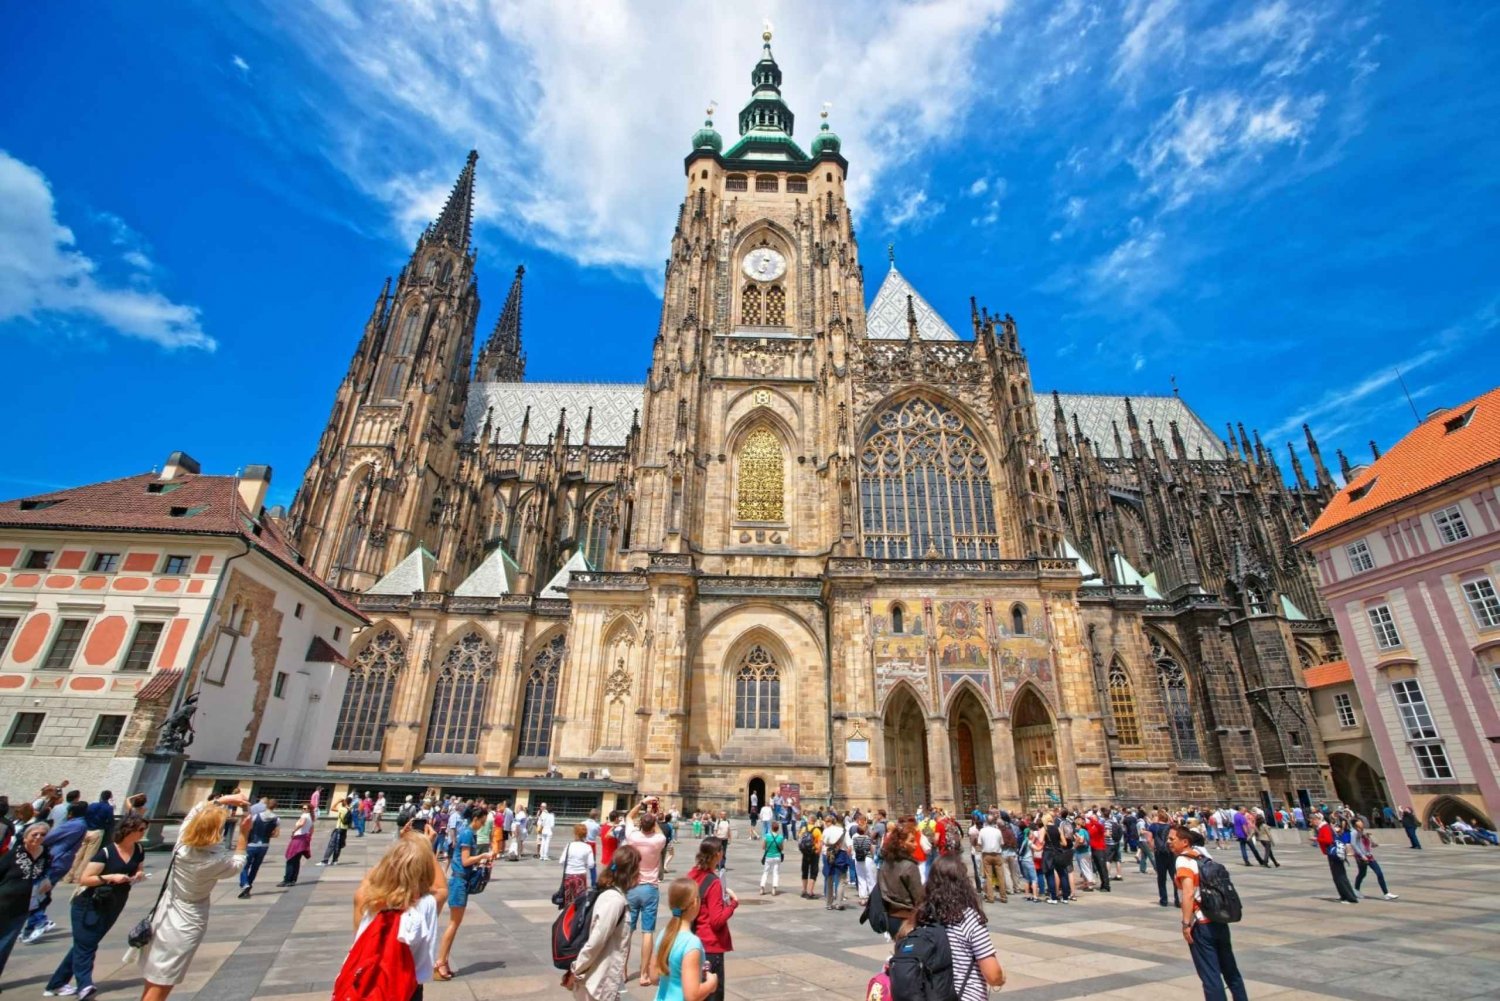 Prague Hradcany Castle, St Vitus Cathedral Tour with Tickets